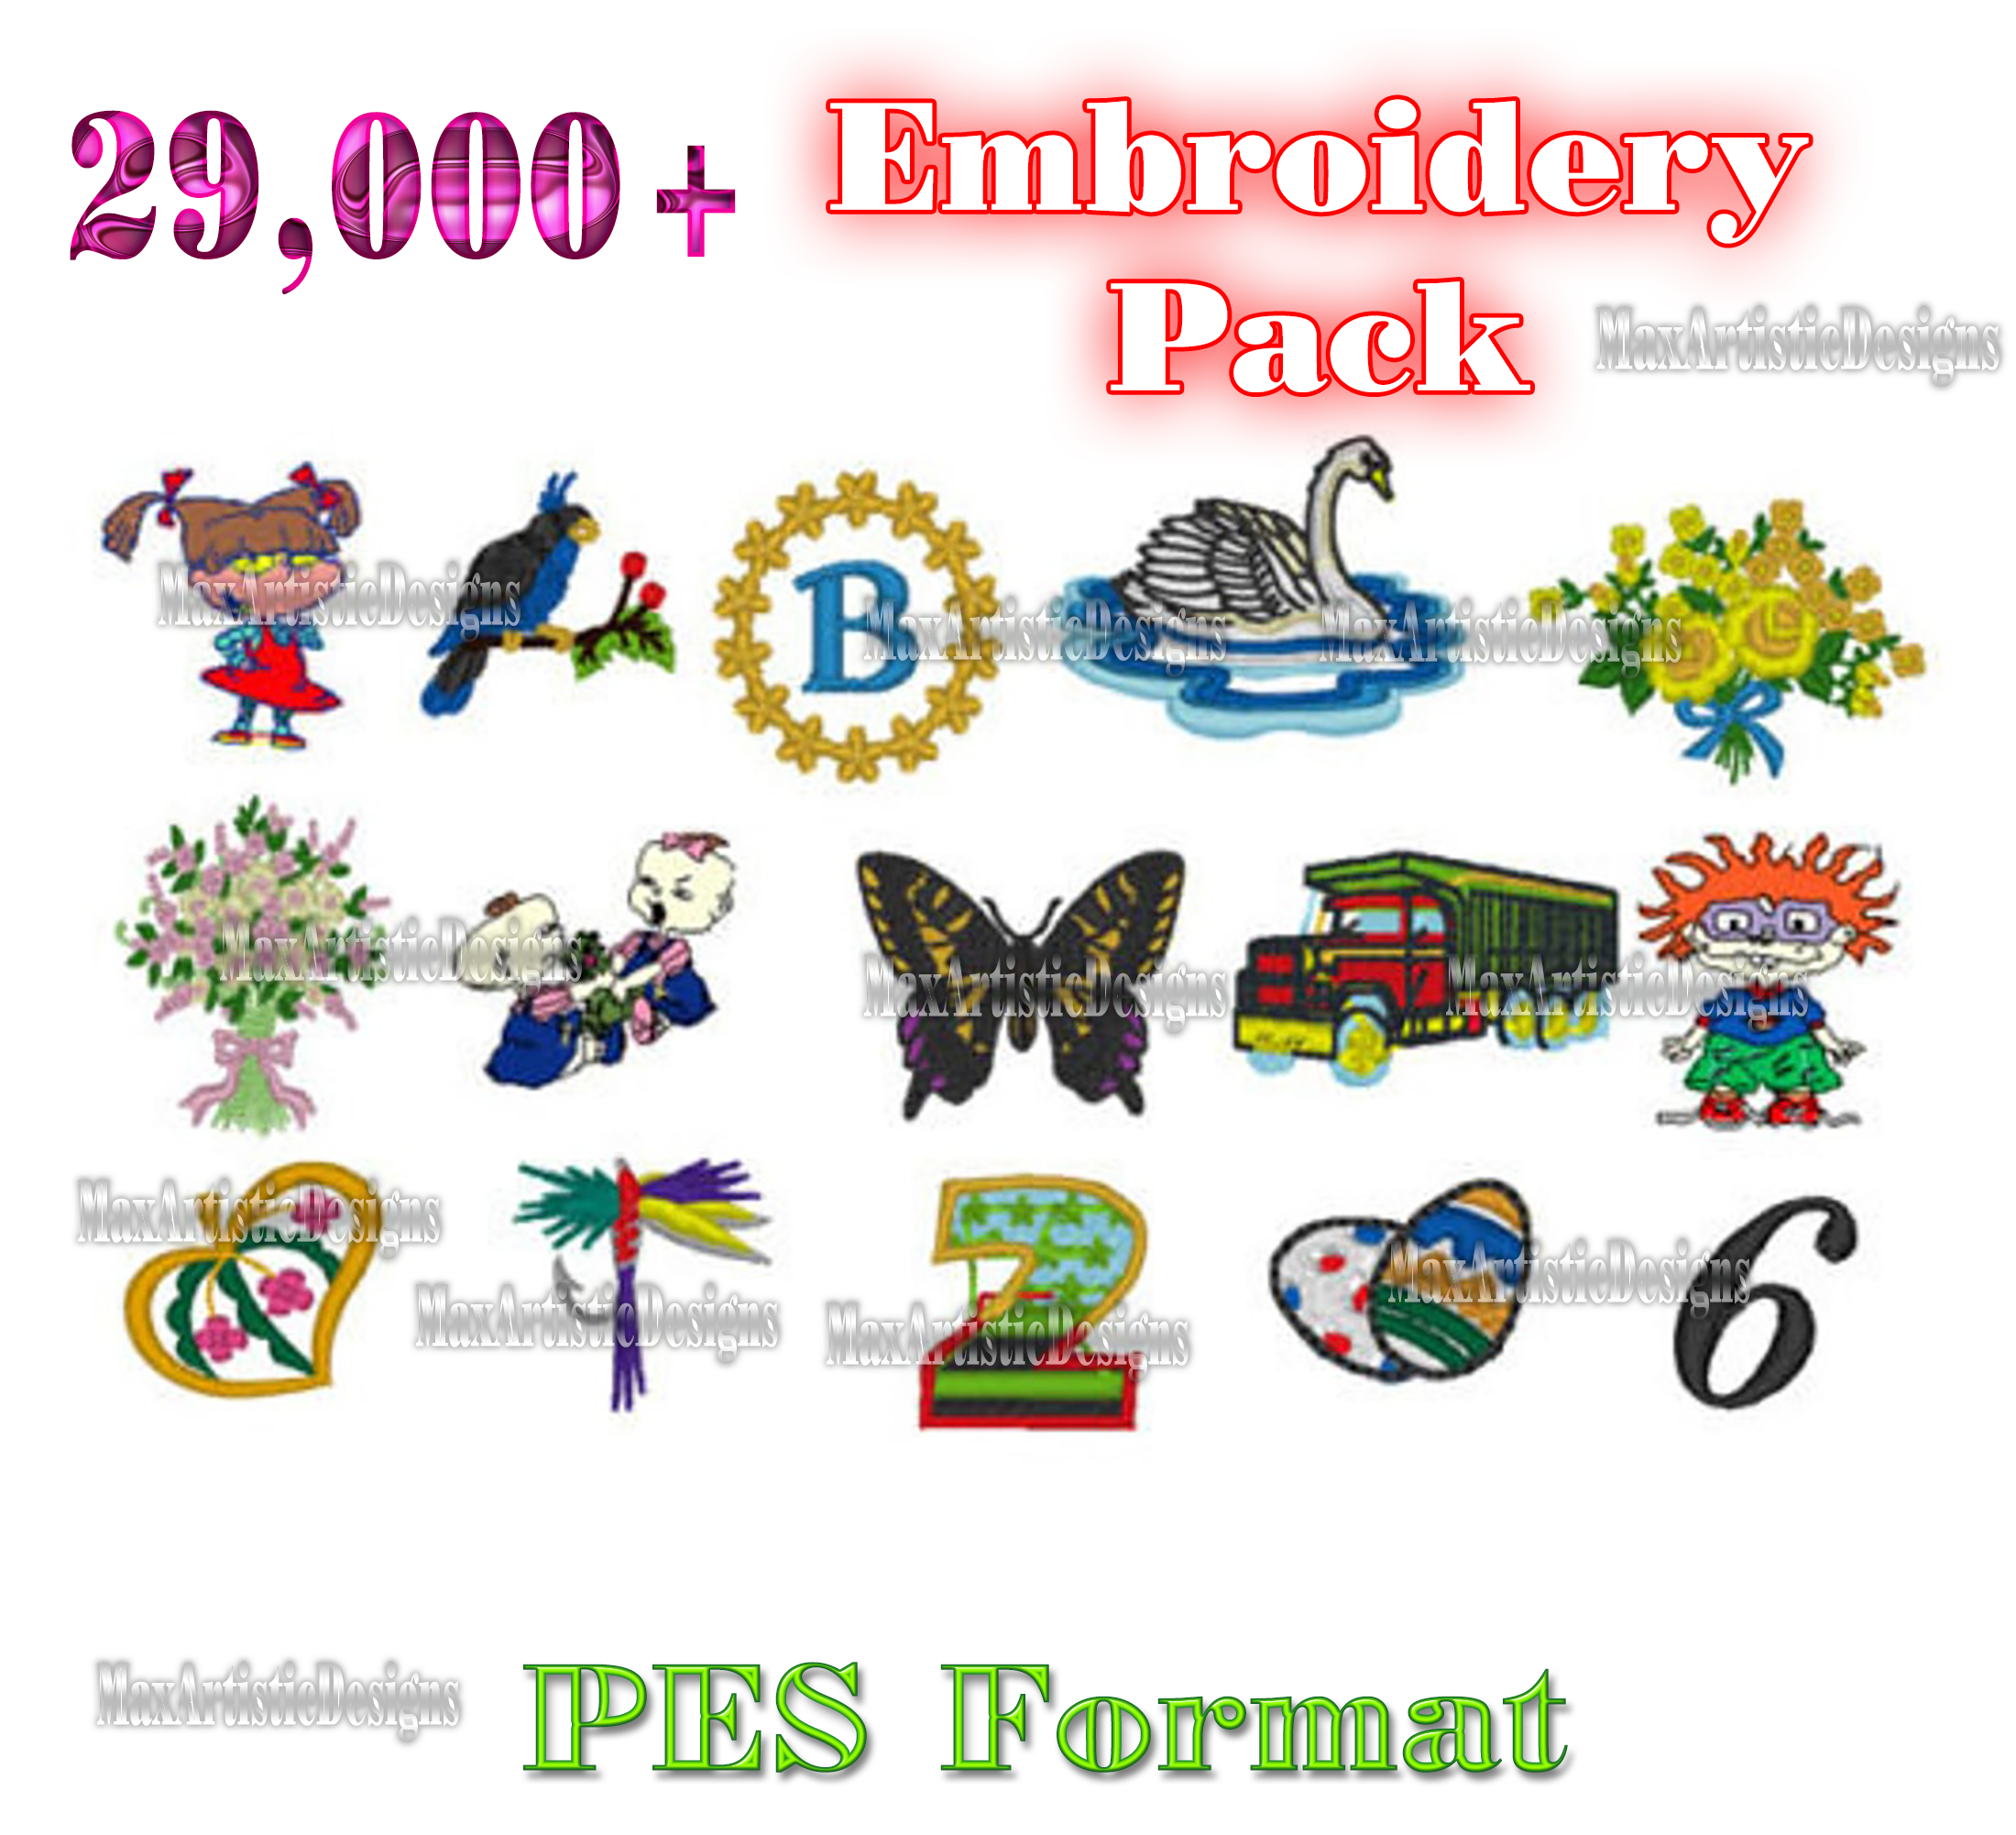 29000+ embroidery files of animals, fonts, holidays, rugrat design patterns in XXX .SEW . BMP .PES file formats